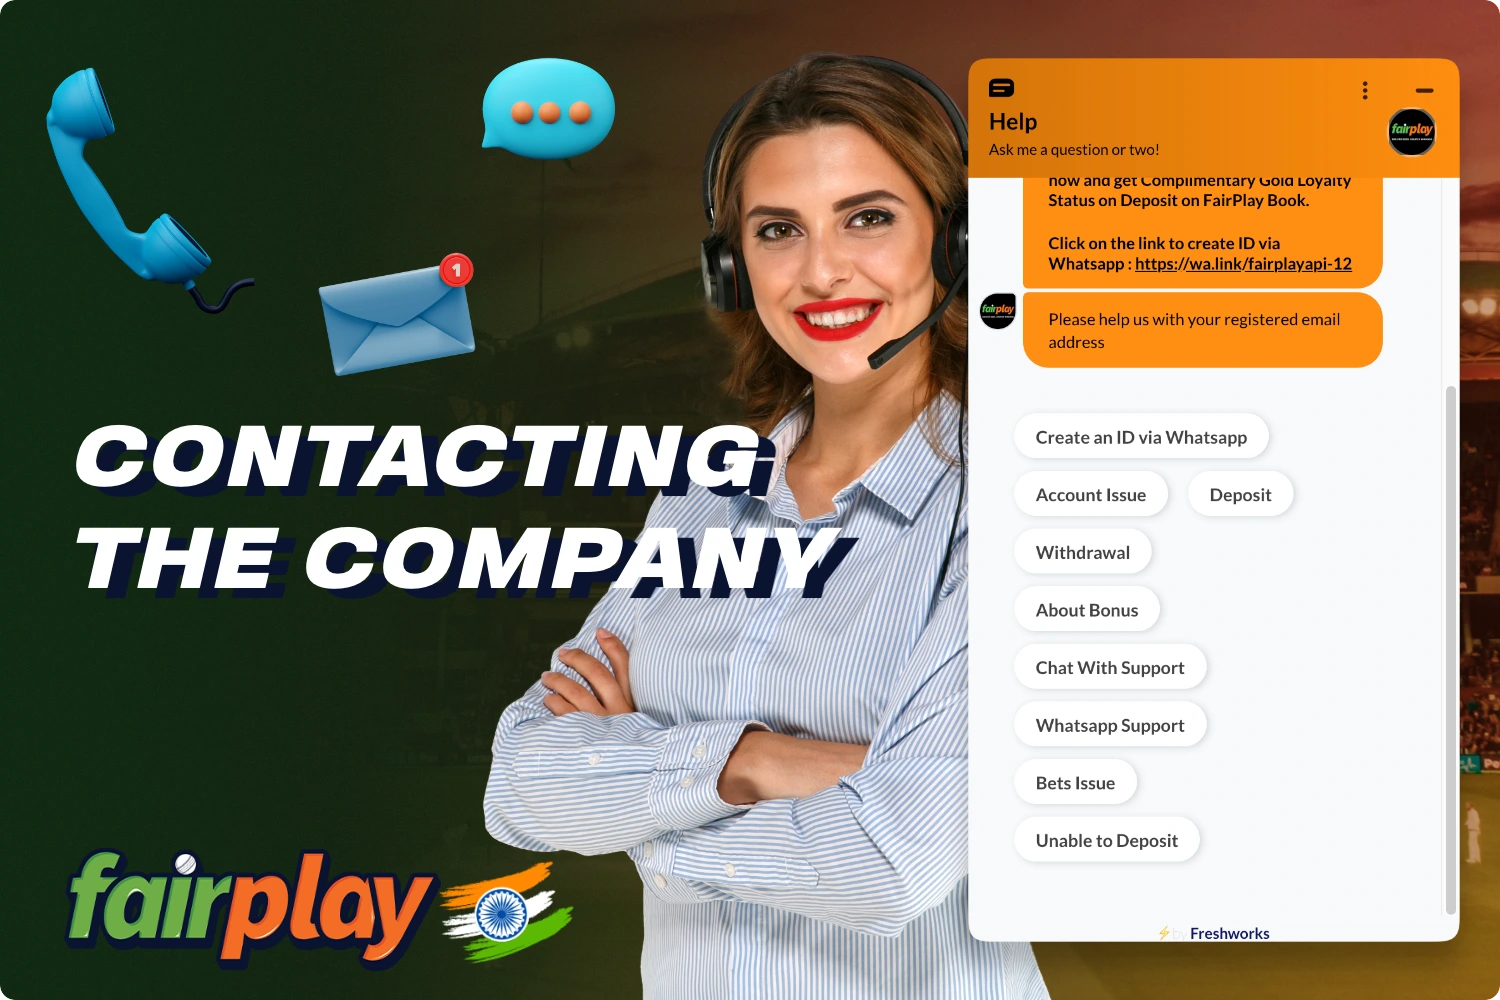 Use the actual contacts of Fairplay in India to get help from the platform's customer support team